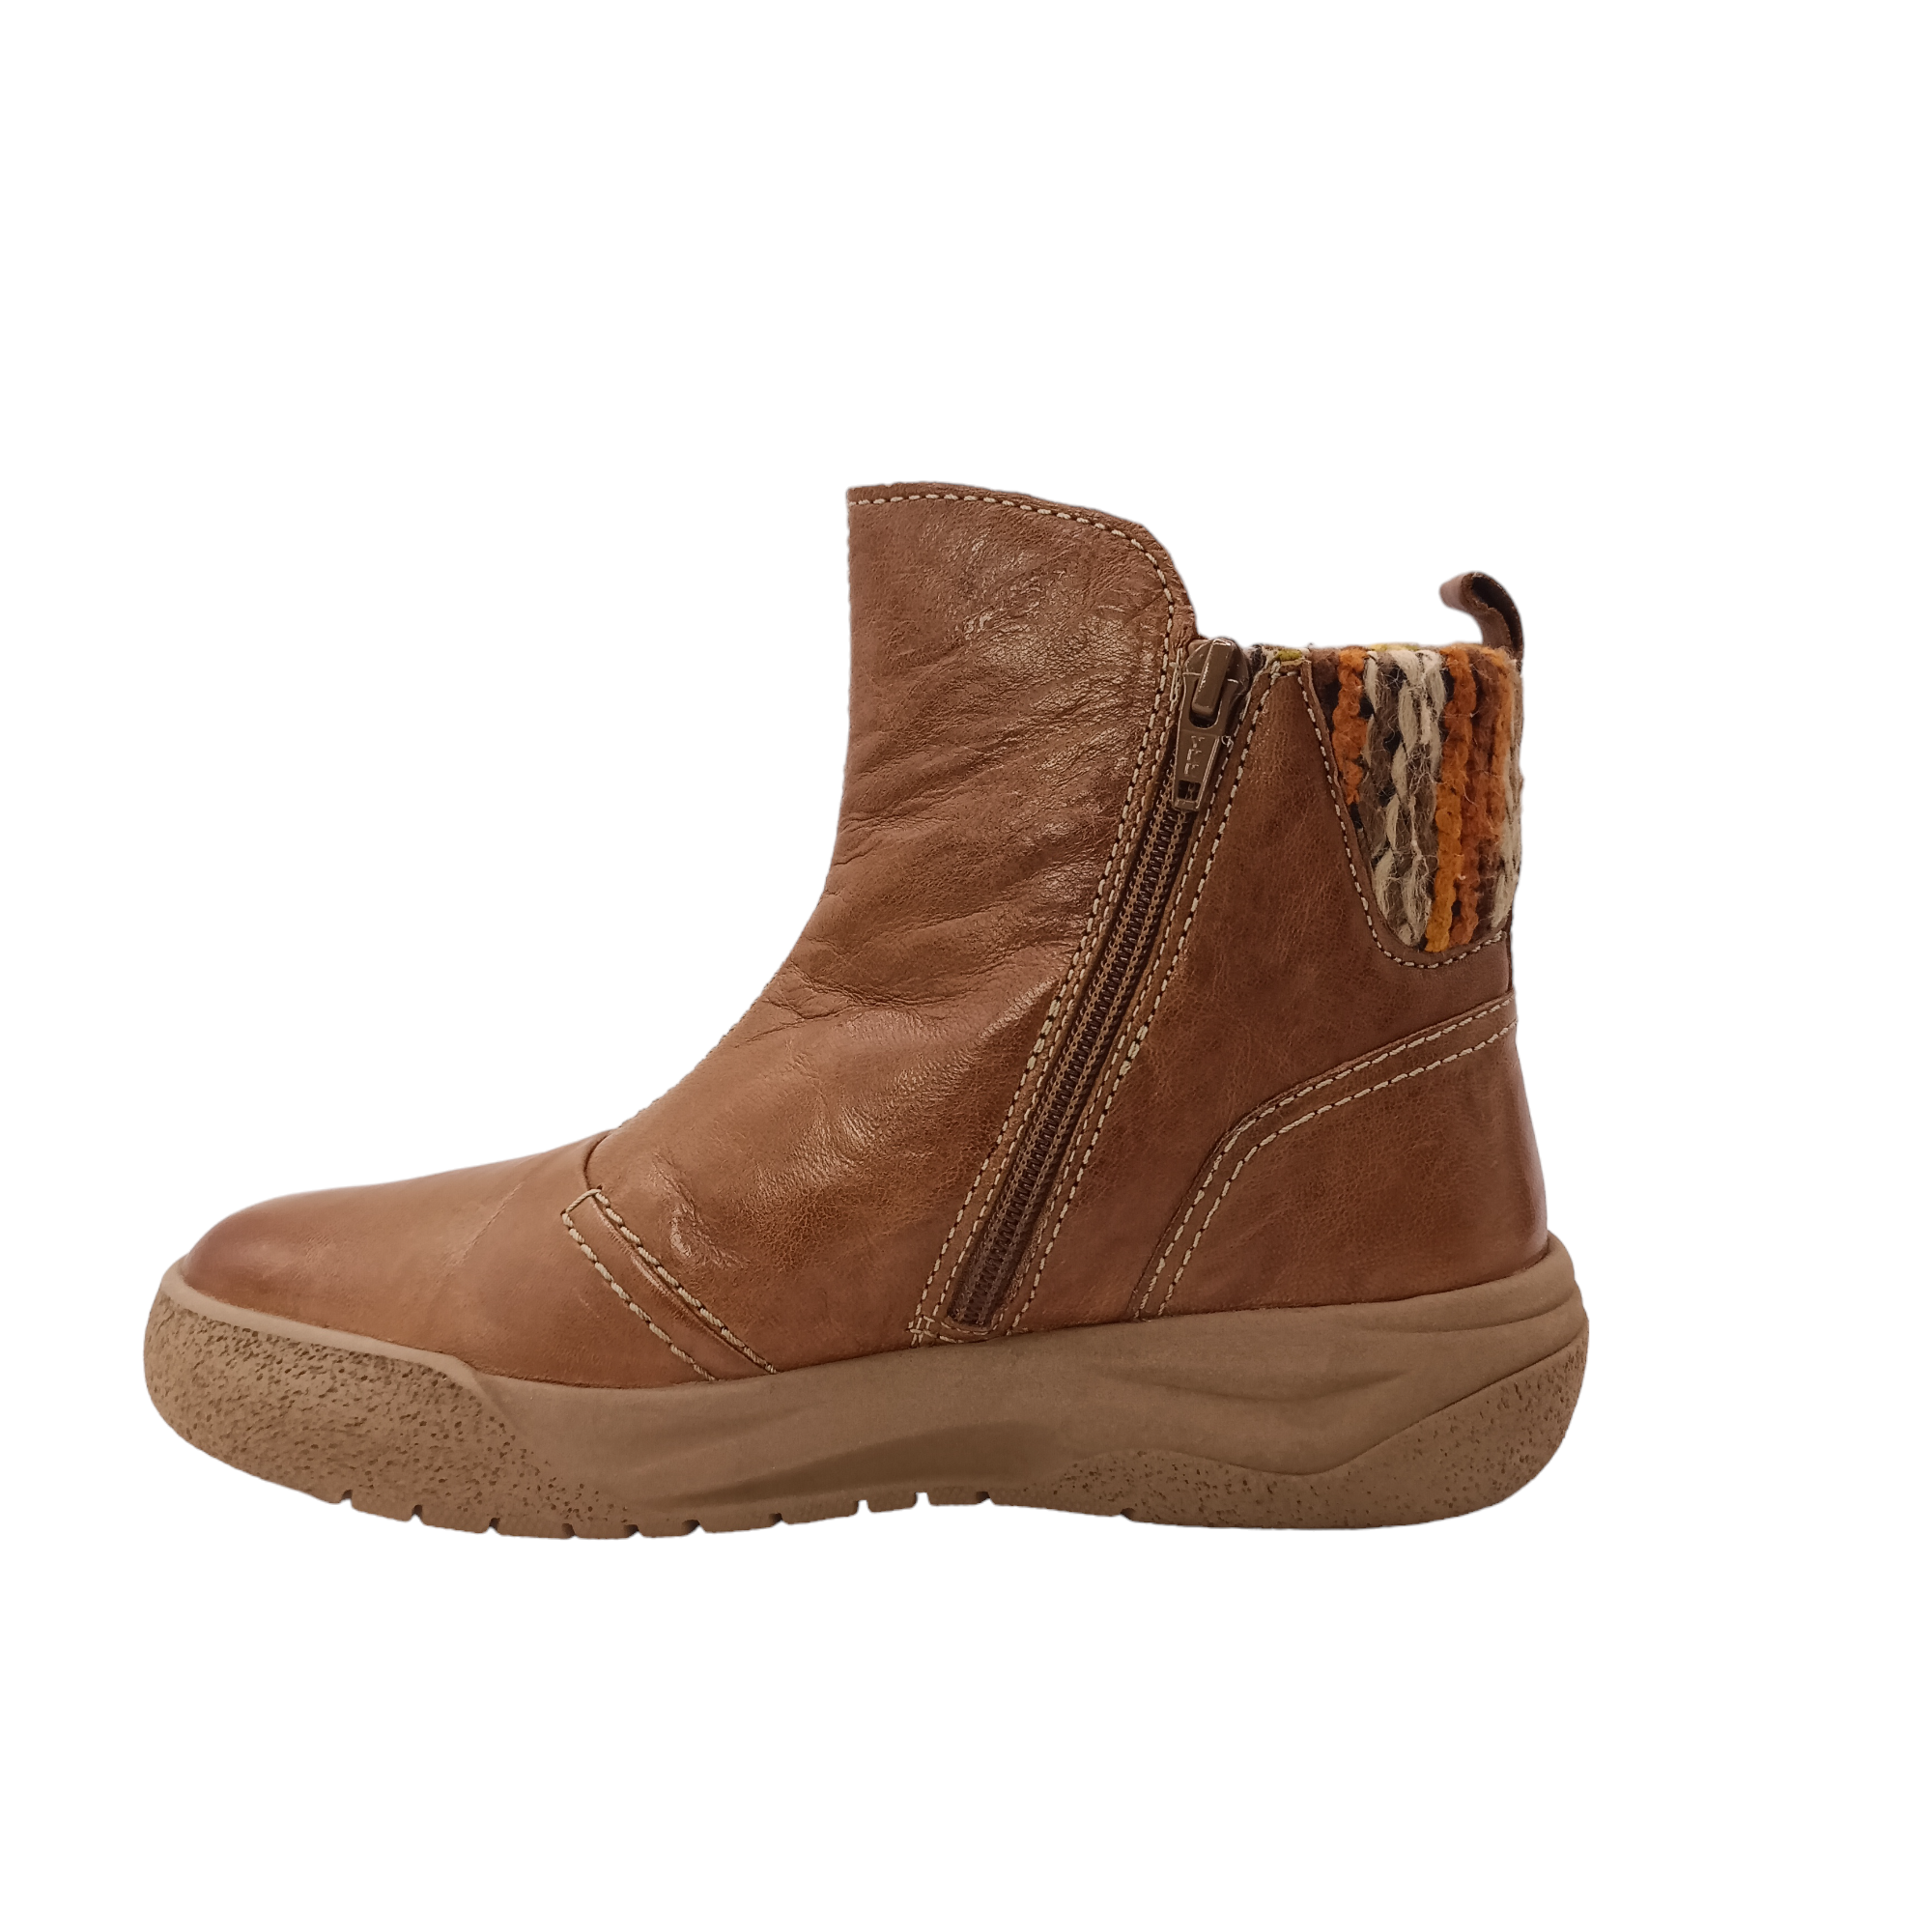 Shop Alina 51 Josef Seibel - with shoe&amp;me - from Josef Seibel - Boots - boots, Winter, Womens - [collection]